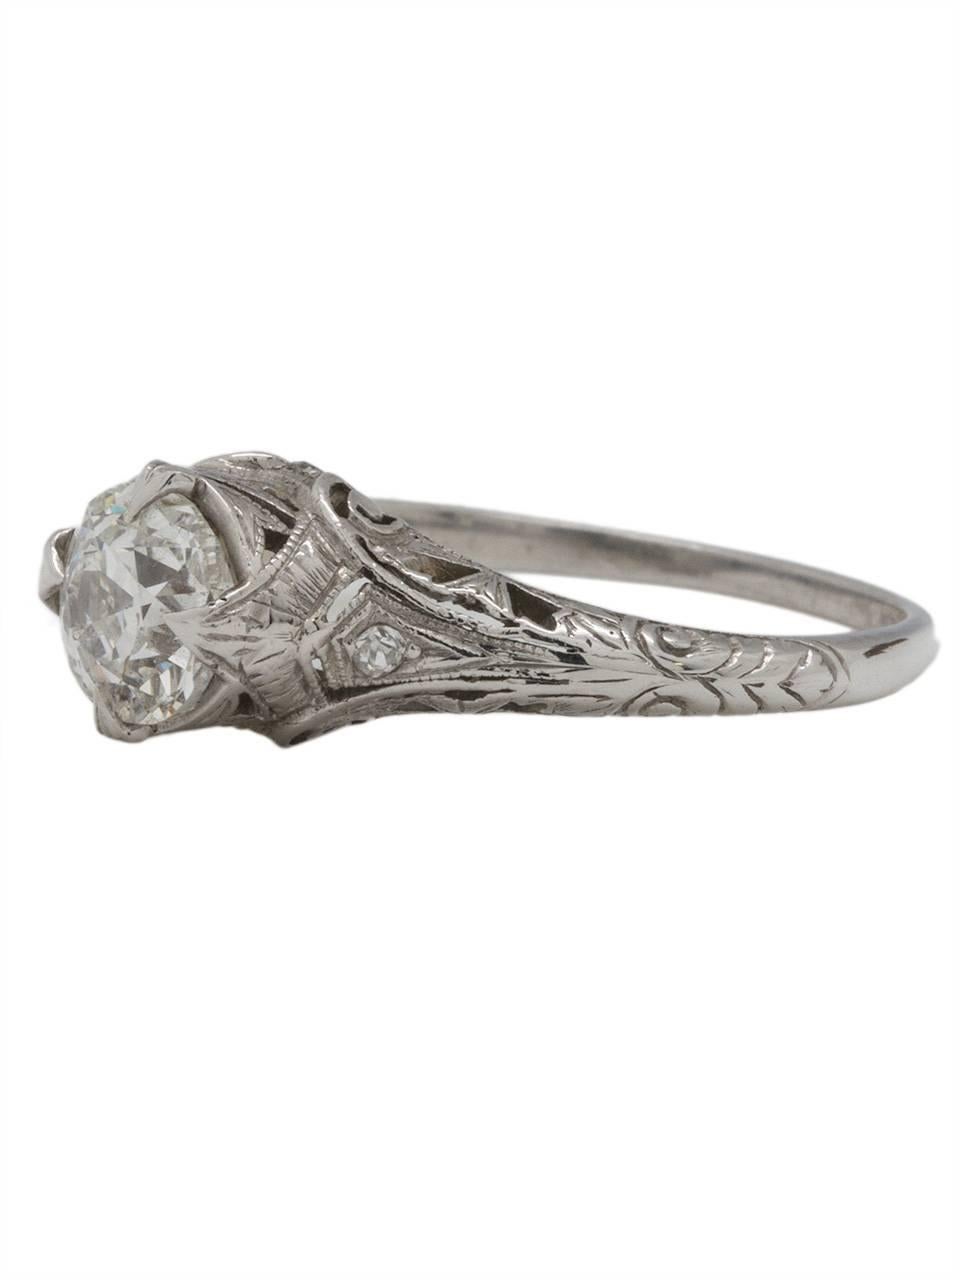 This lovely antique Edwardian platinum engagement ring showcases a stunning EGL certifed 1.10ct Old Mine Cut center diamond, G-SI2. This ring is loaded with romantic detail; softly swirling filigree and a delicate milgrain edge wrap up and around